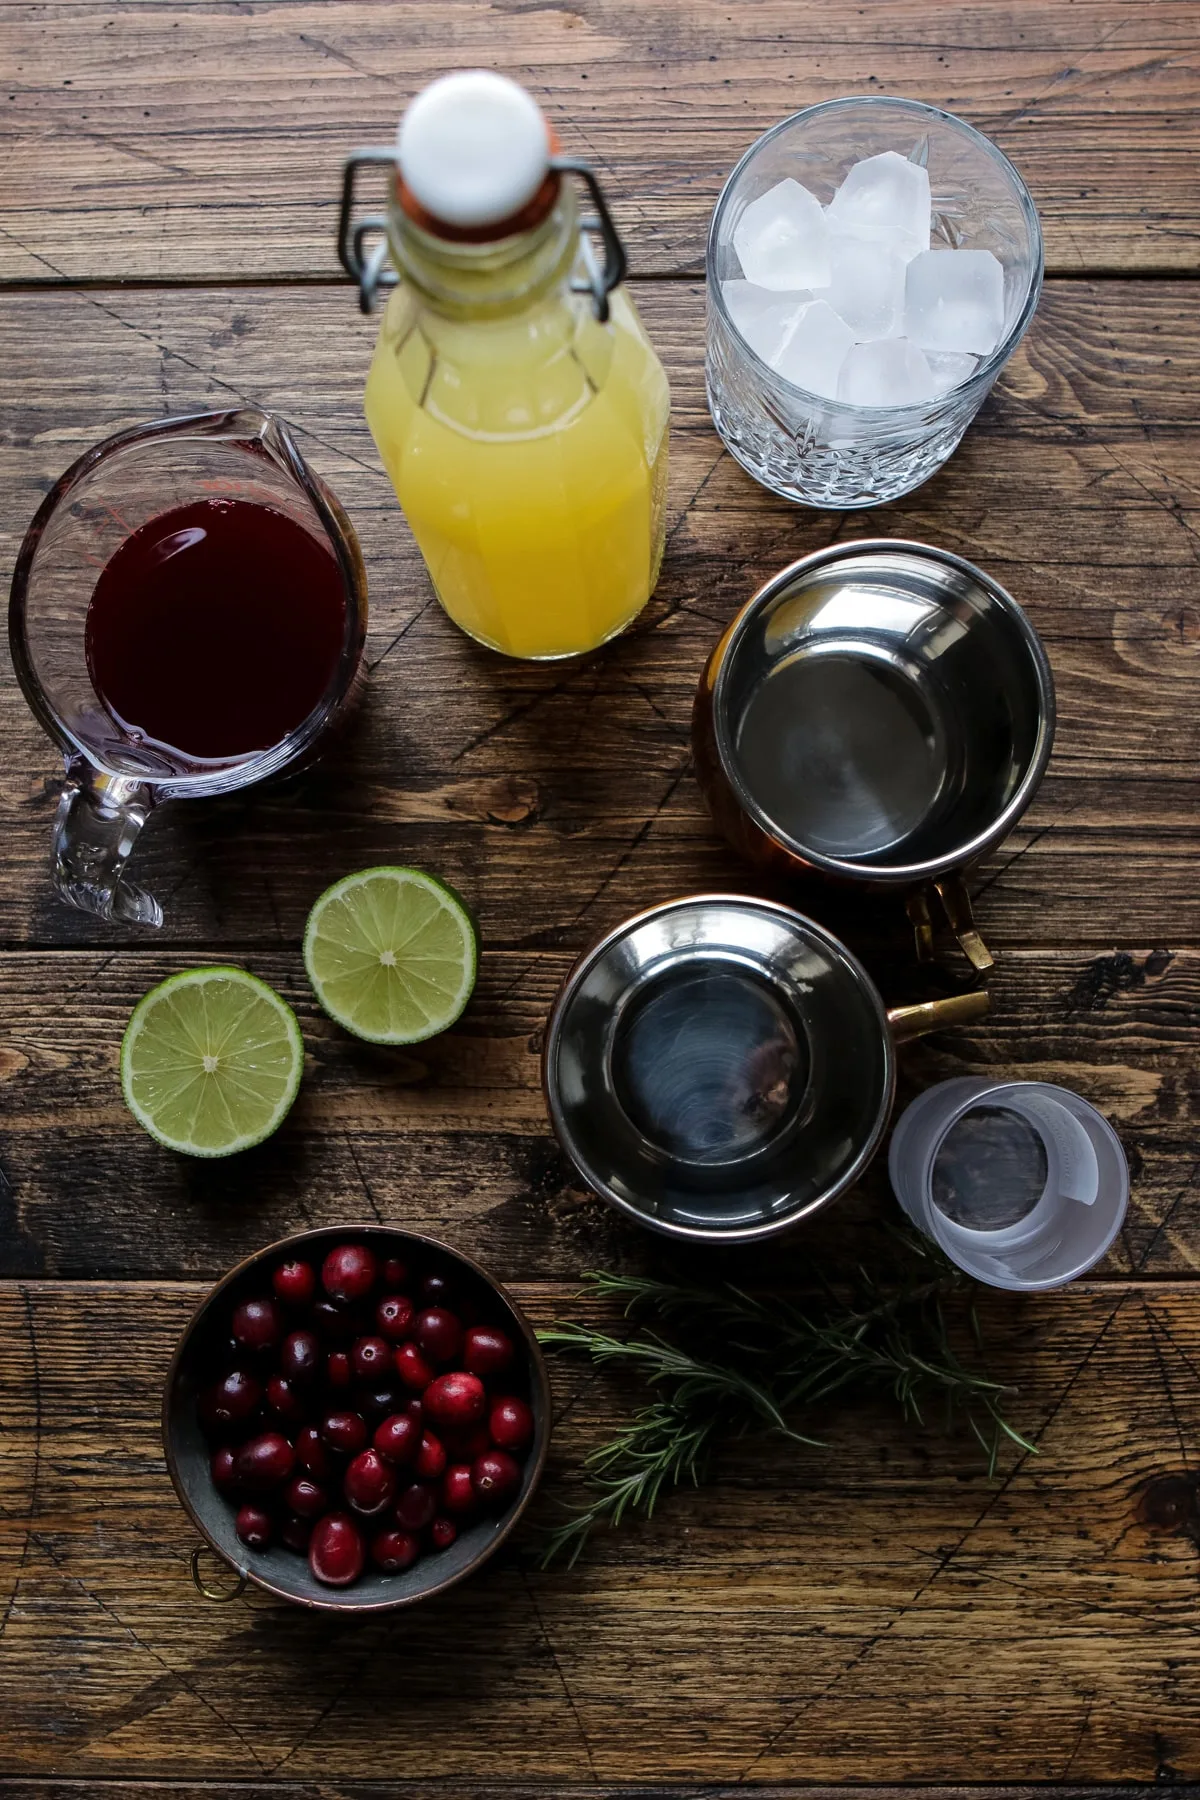 Ingredients for Cranberry Moscow Mule.